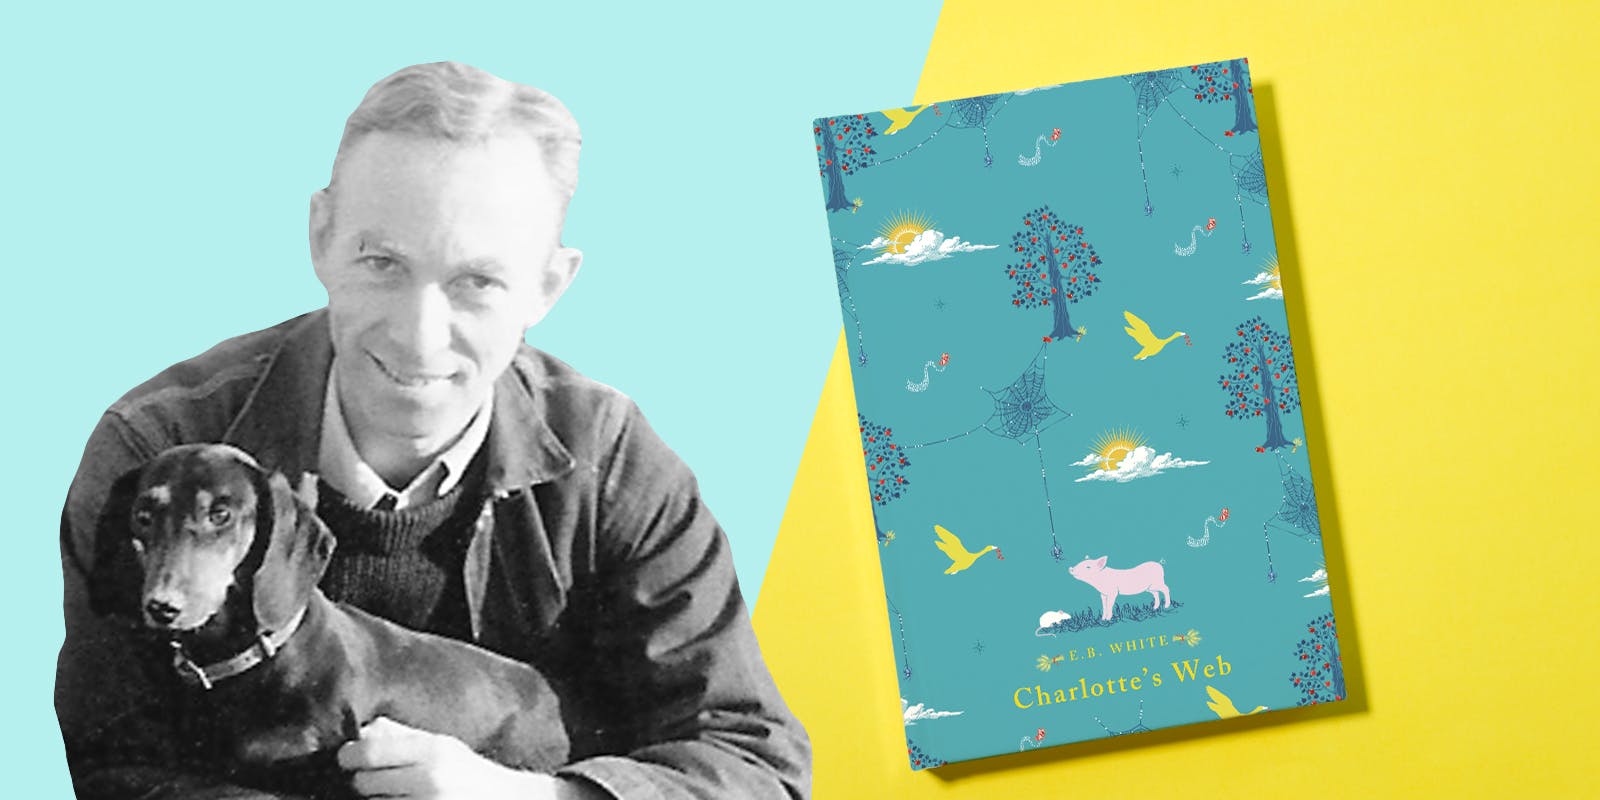 12 fun facts about E.B. White, author of Charlotte's Web